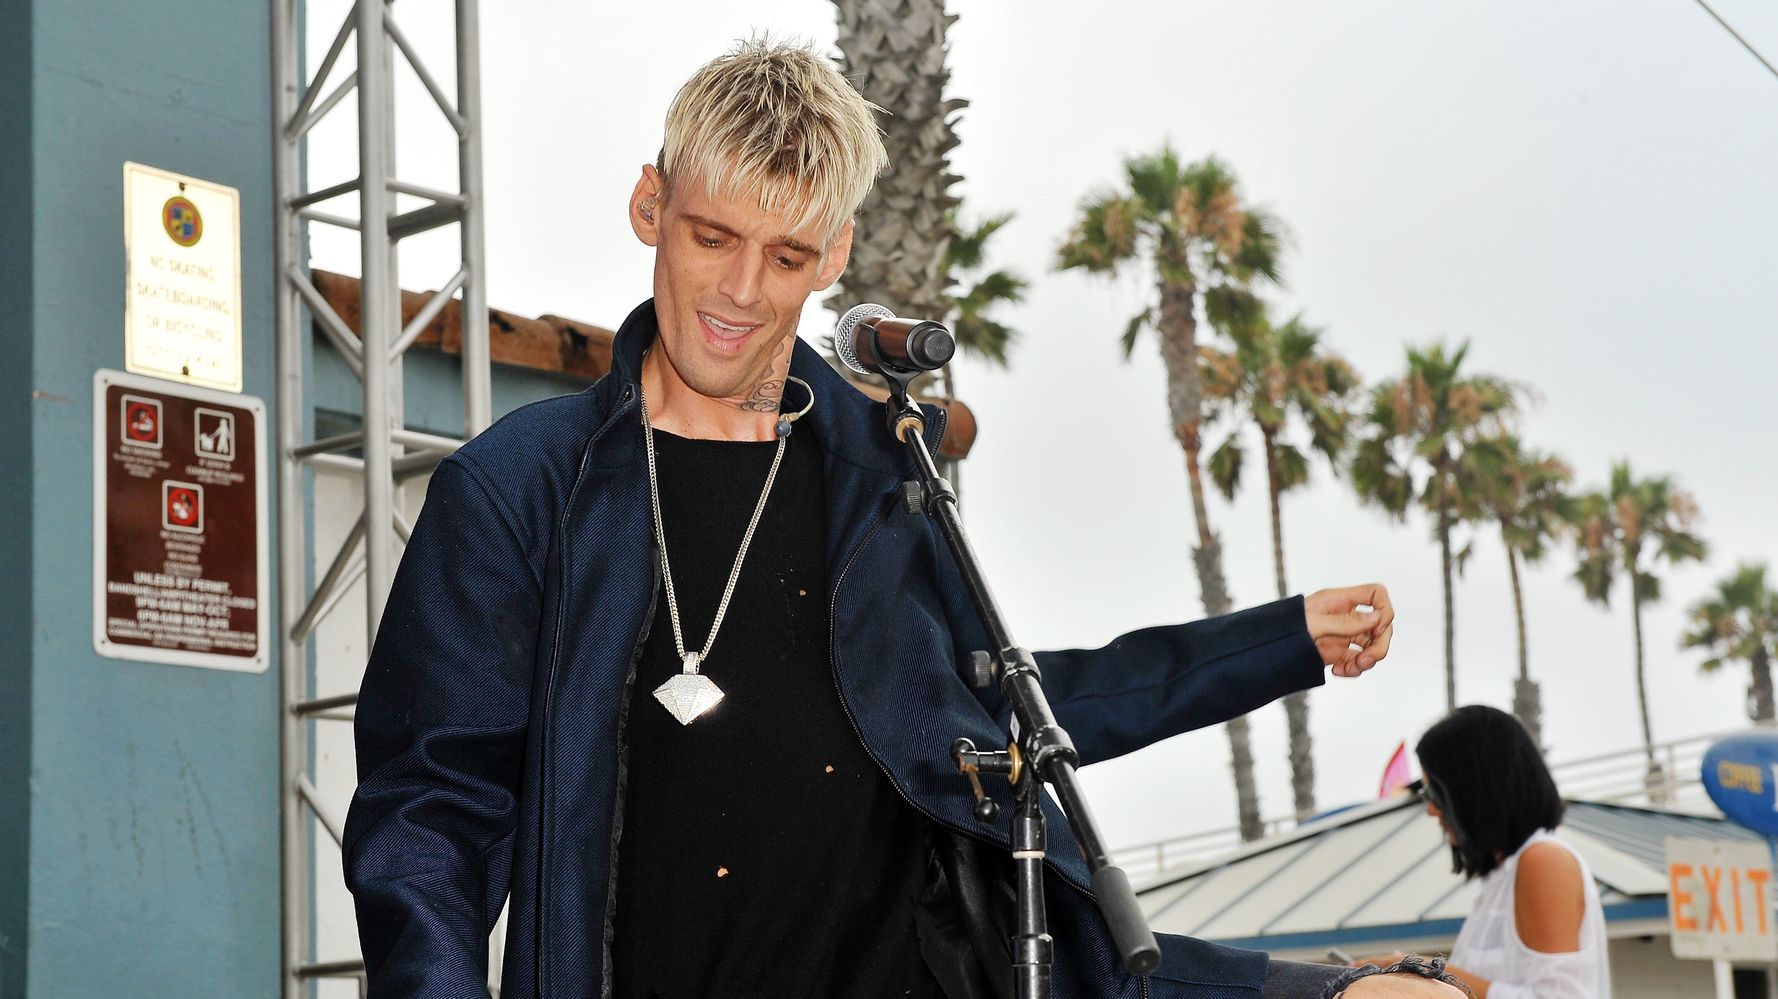 Aaron Carter Is 'Looking Forward To The Future' After Coming Out ...